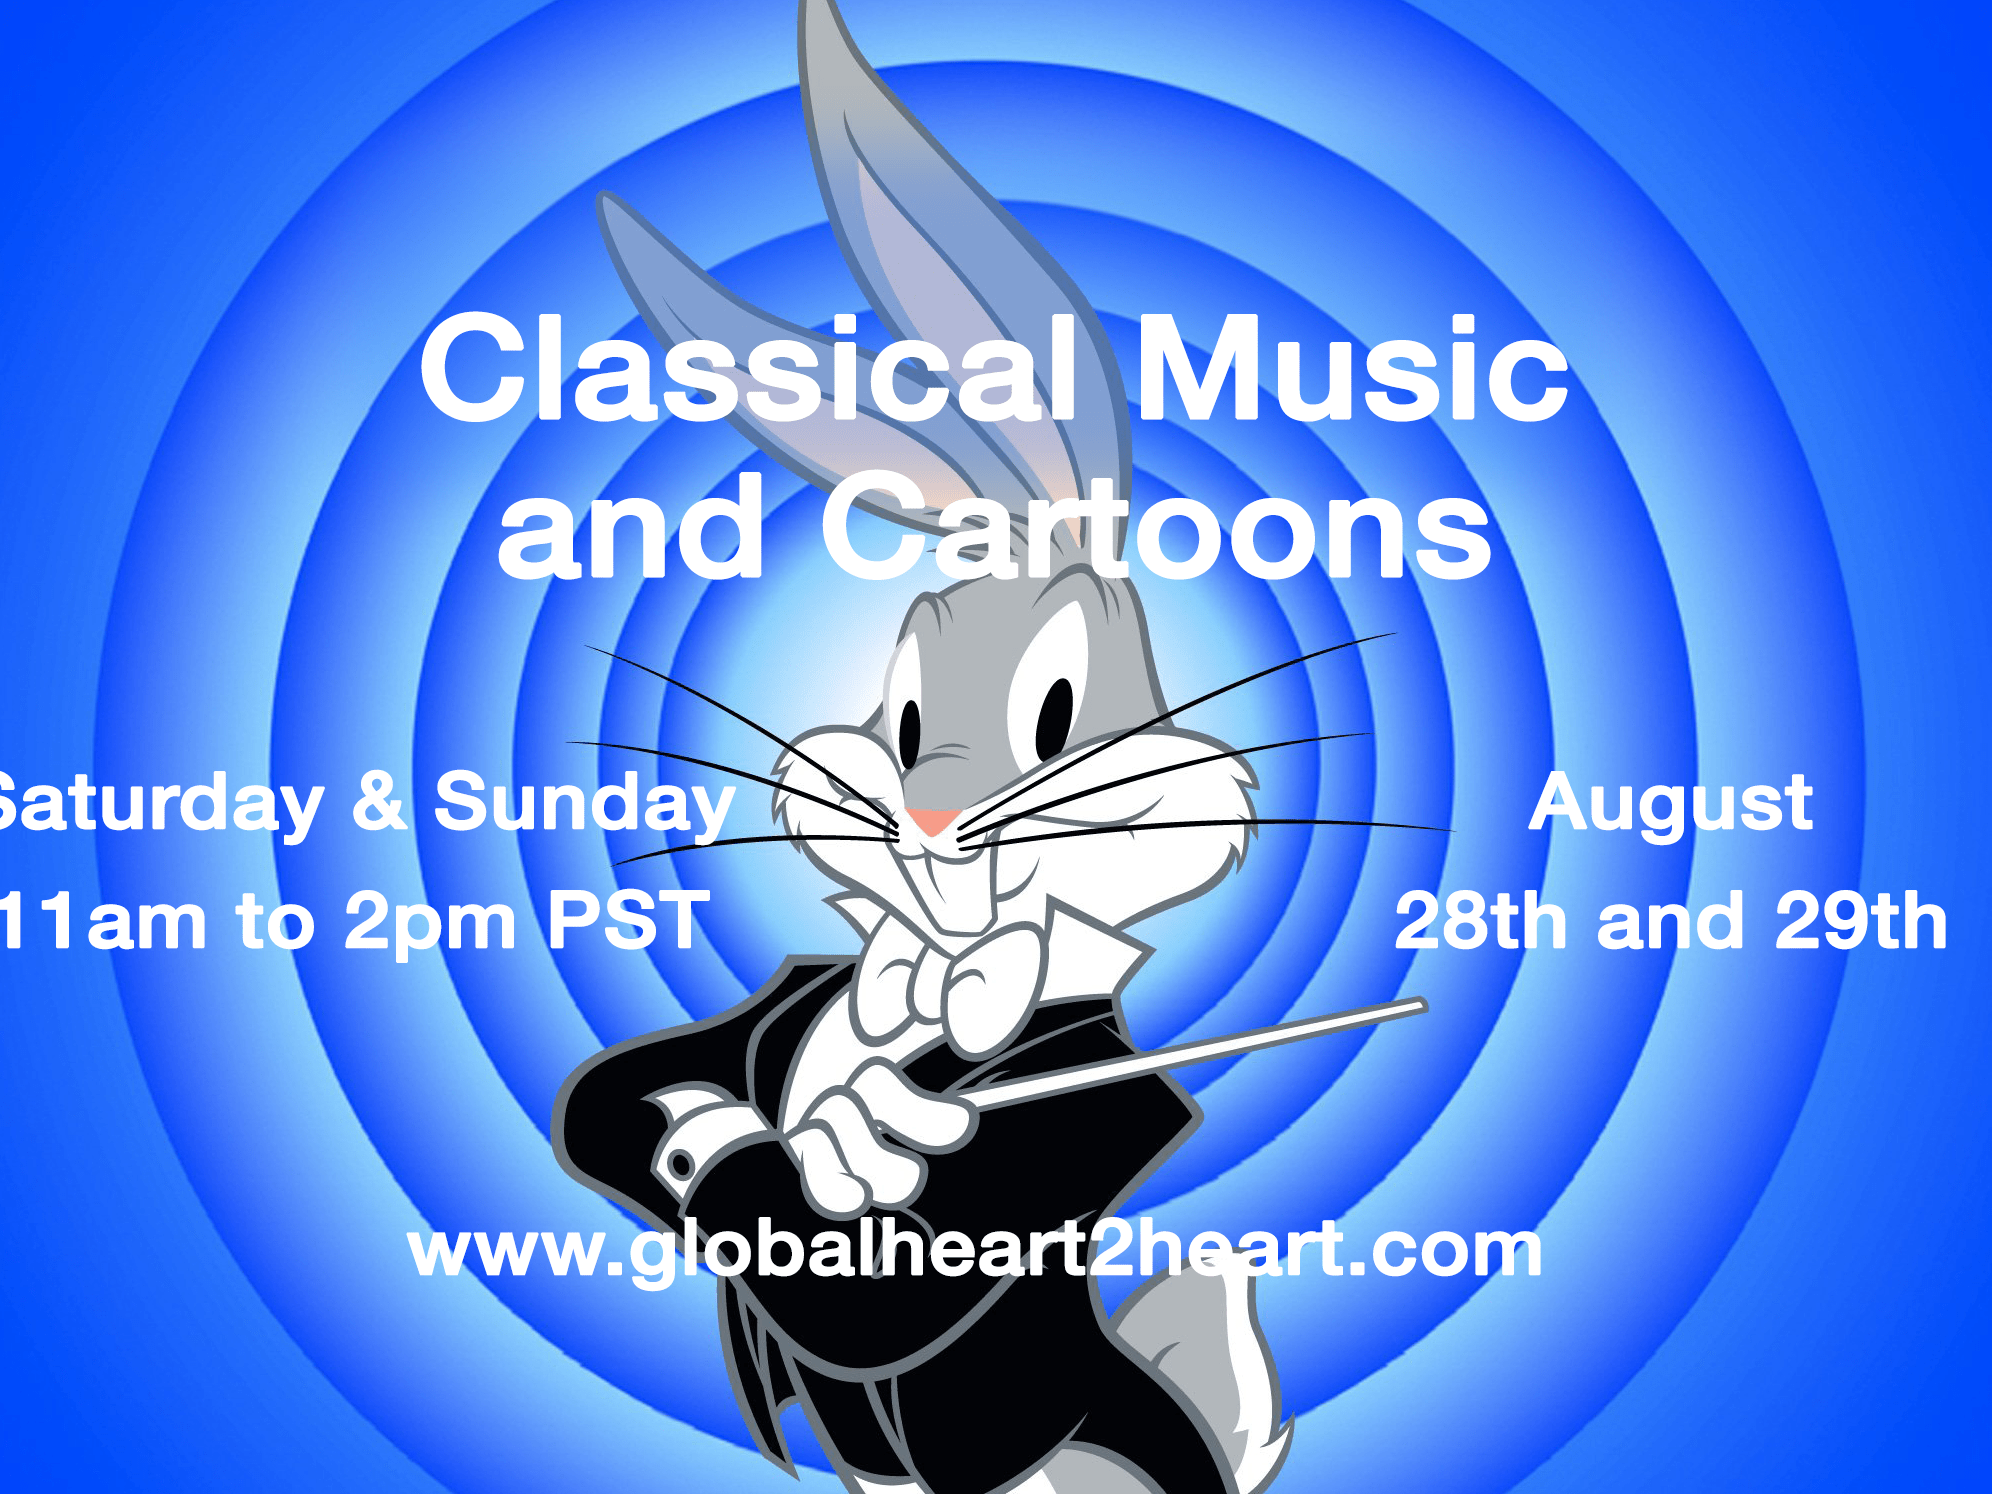 Classical Music and Cartoons this Weekend August 28th and 29th